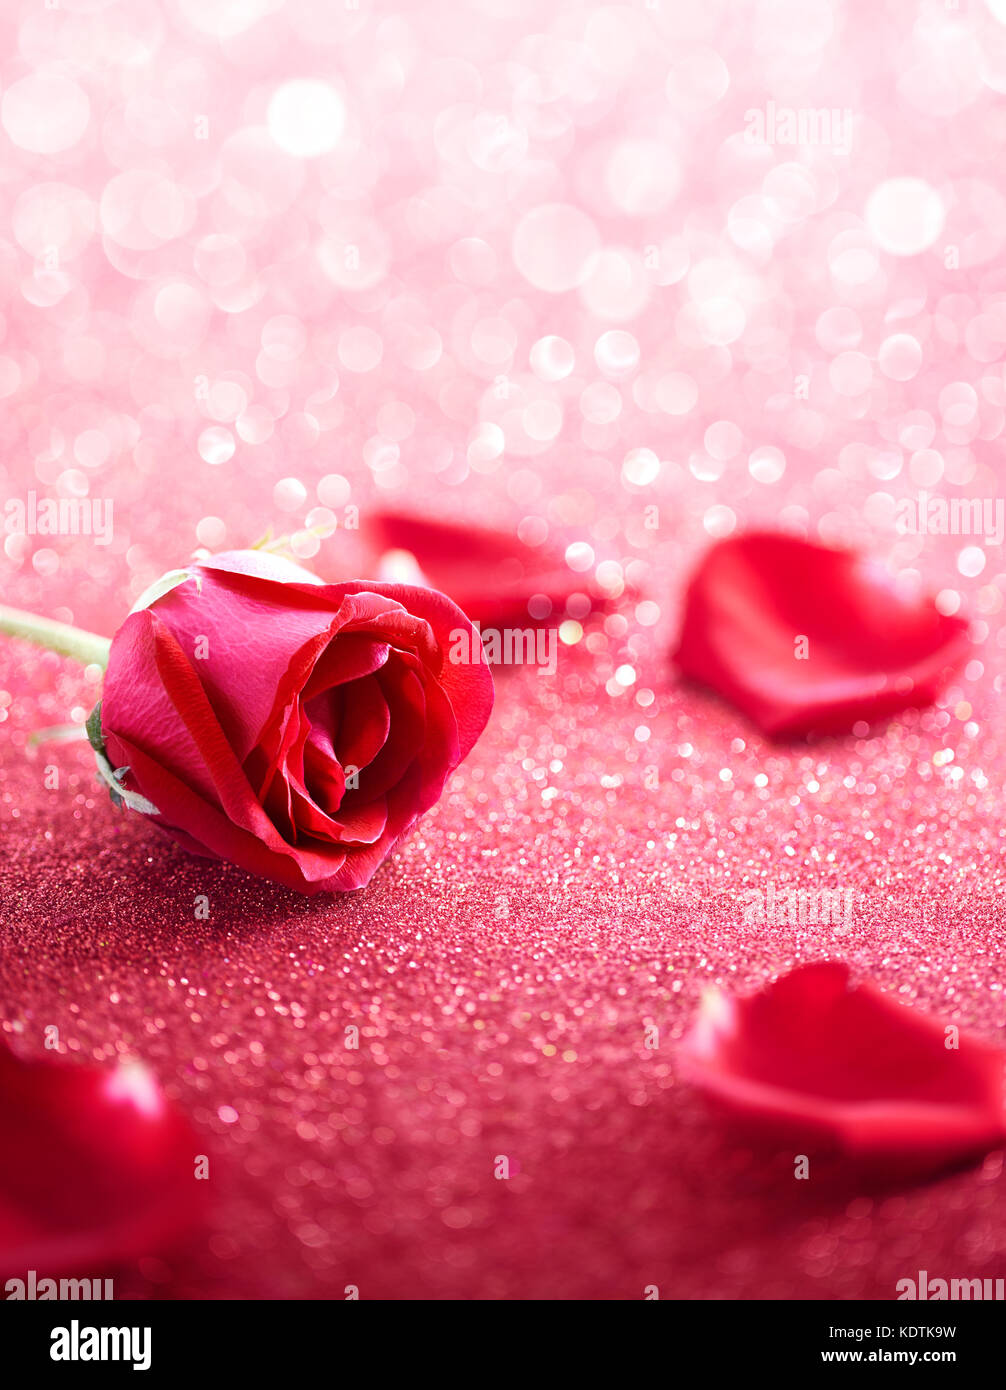 Red rose and petal over glittering background Stock Photo - Alamy